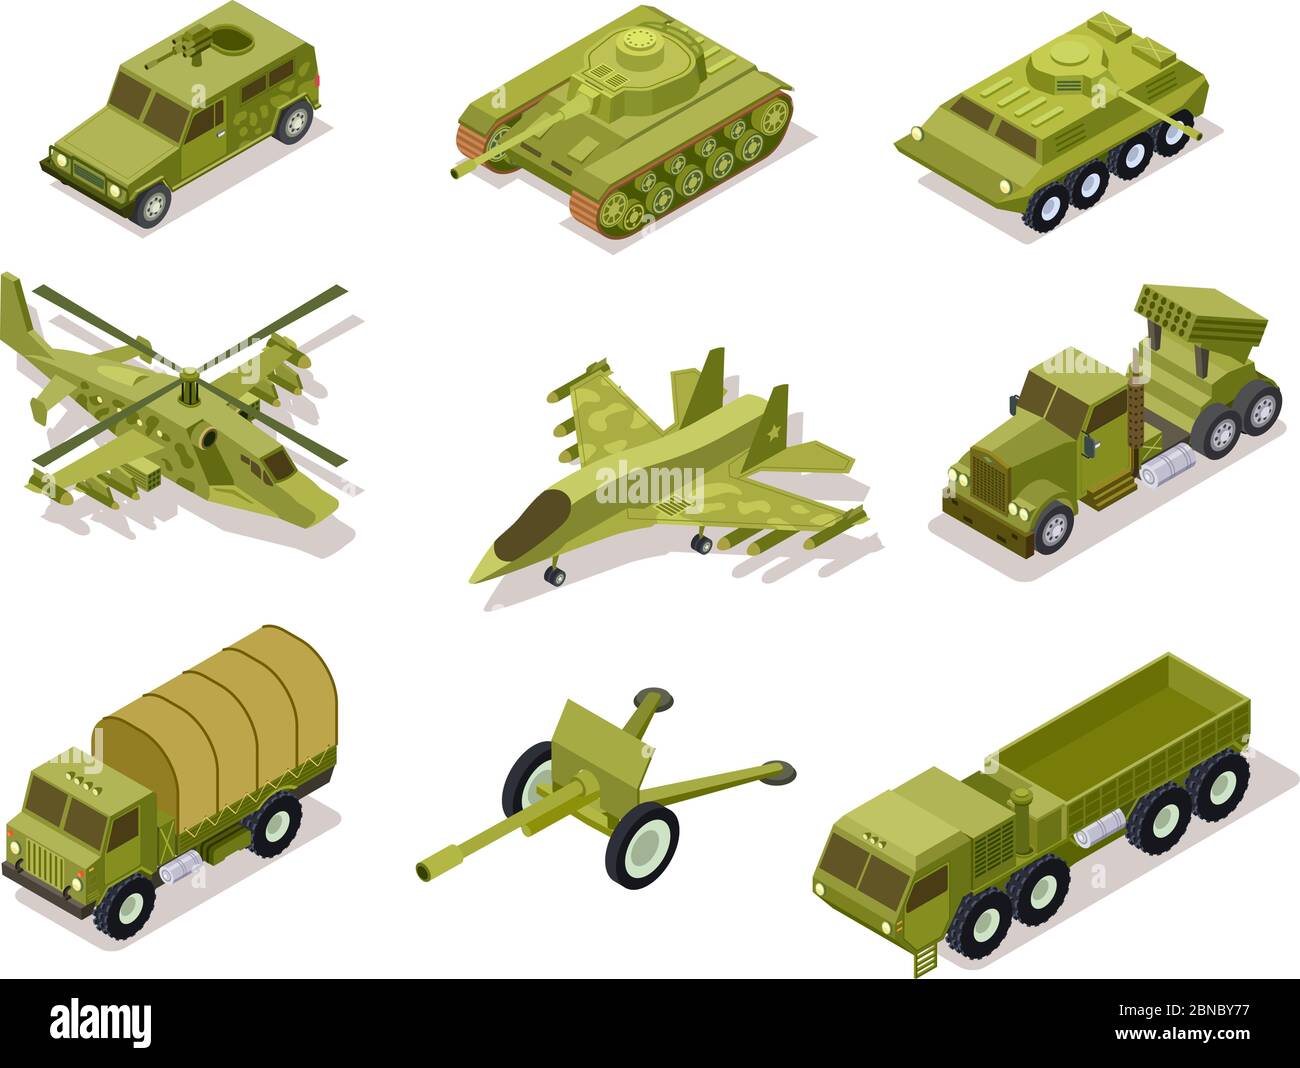 Armor weapon collection. Helicopter and cannon, volley fire system and infantry fighting vehicle, tank armored truck. Isometric vector. Army artillery, helicopter military and tank illustration Stock Vector